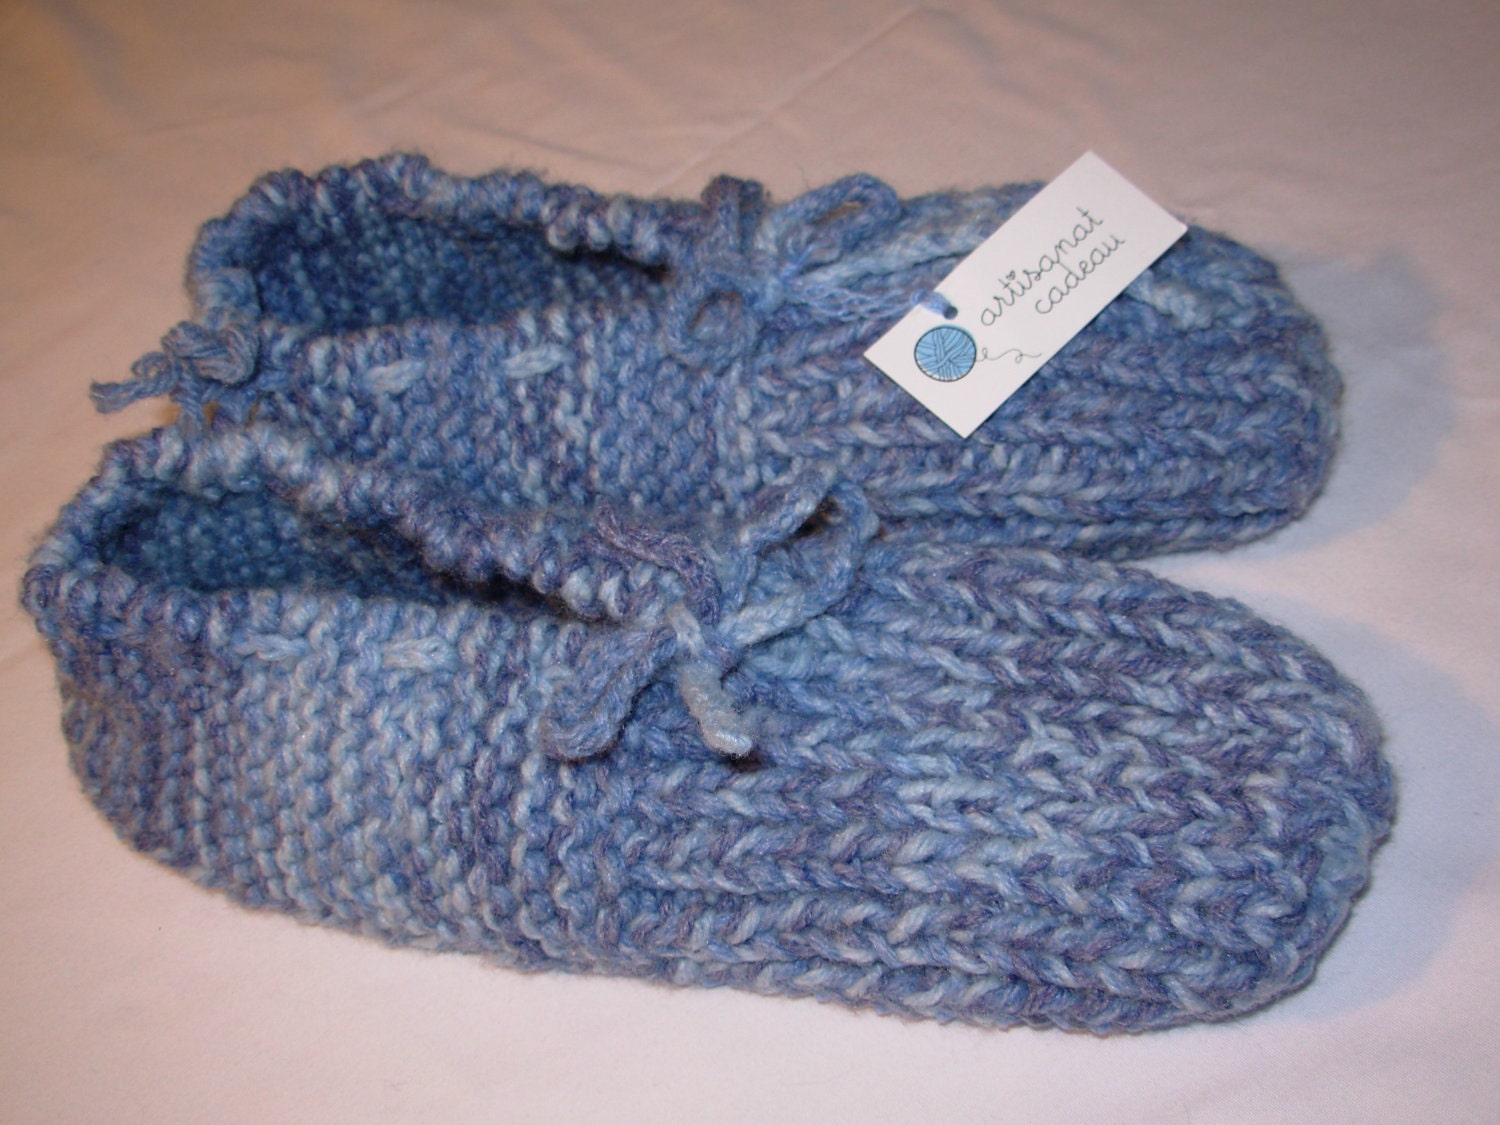 Slippers knitting    for man    ex-large   10-13  with   SECURE SOLES